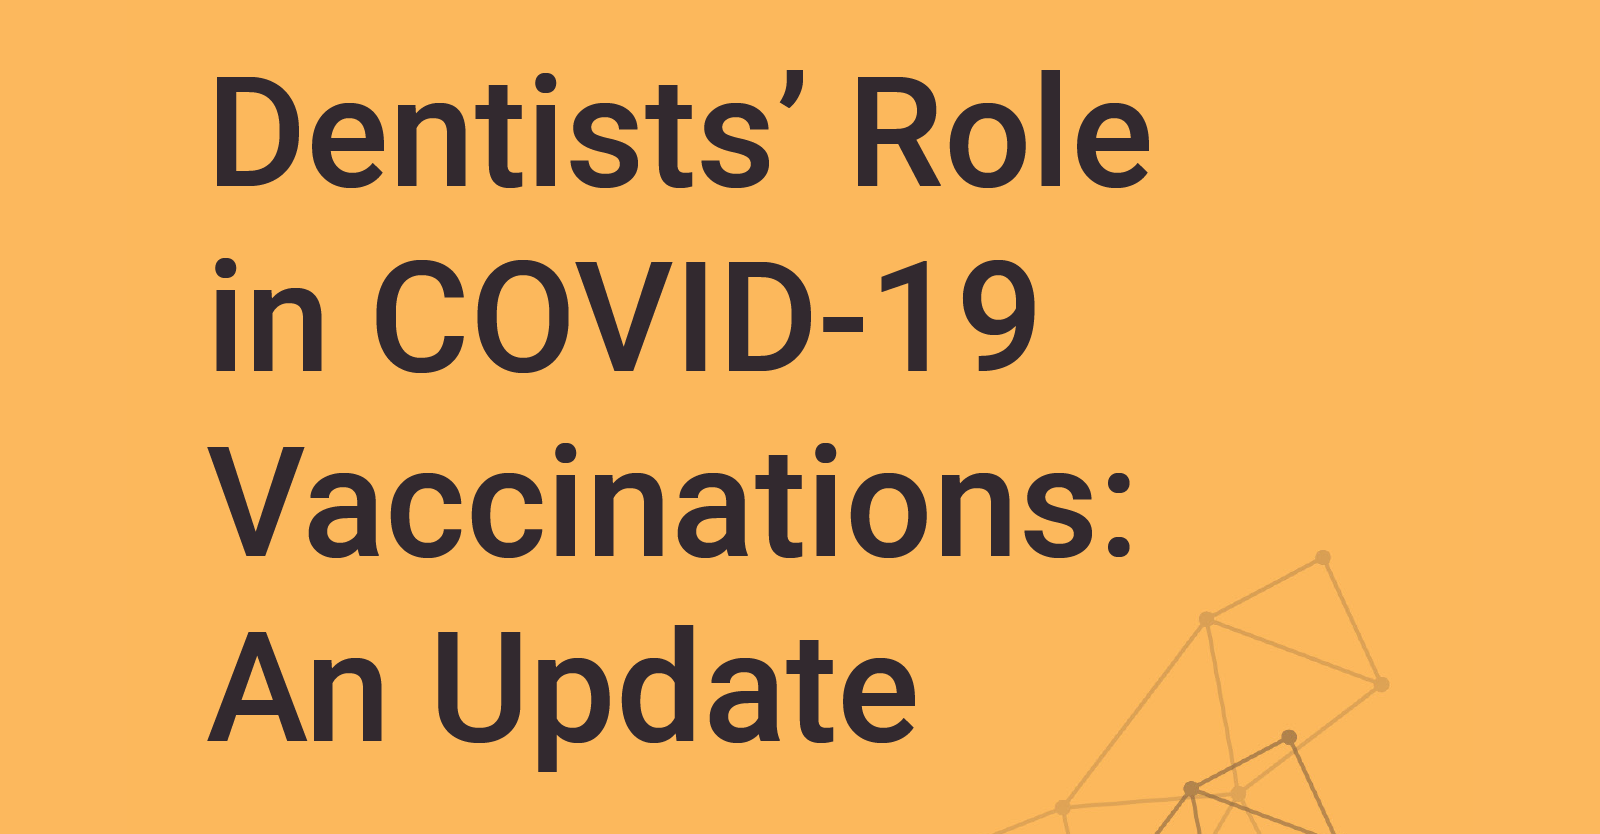 Dentists’ Role in COVID-19 Vaccinations: An Update